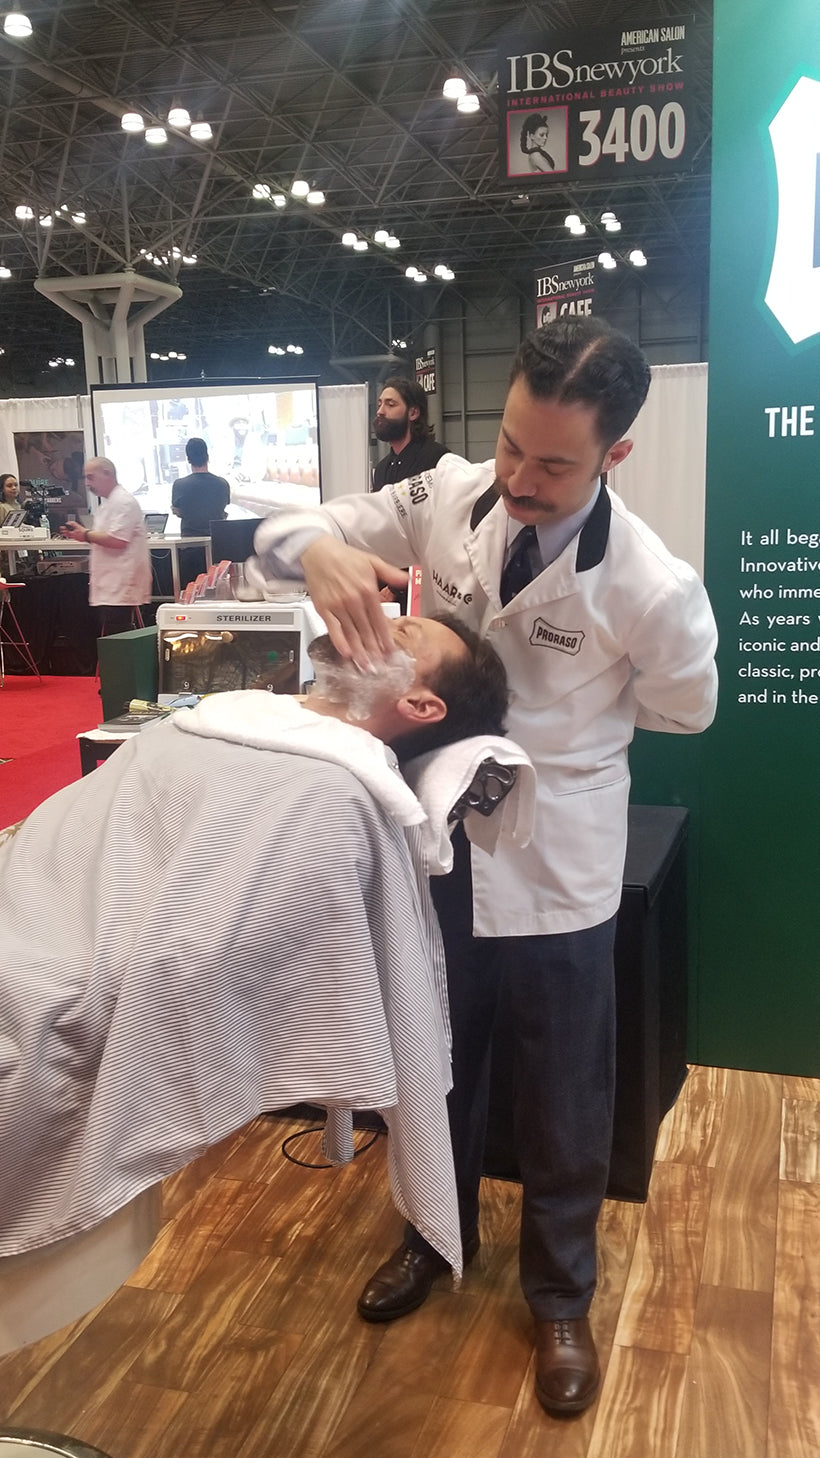 Proraso Master Barber Michael Haar applying shave cream to a client who is reclining in a barber chair.